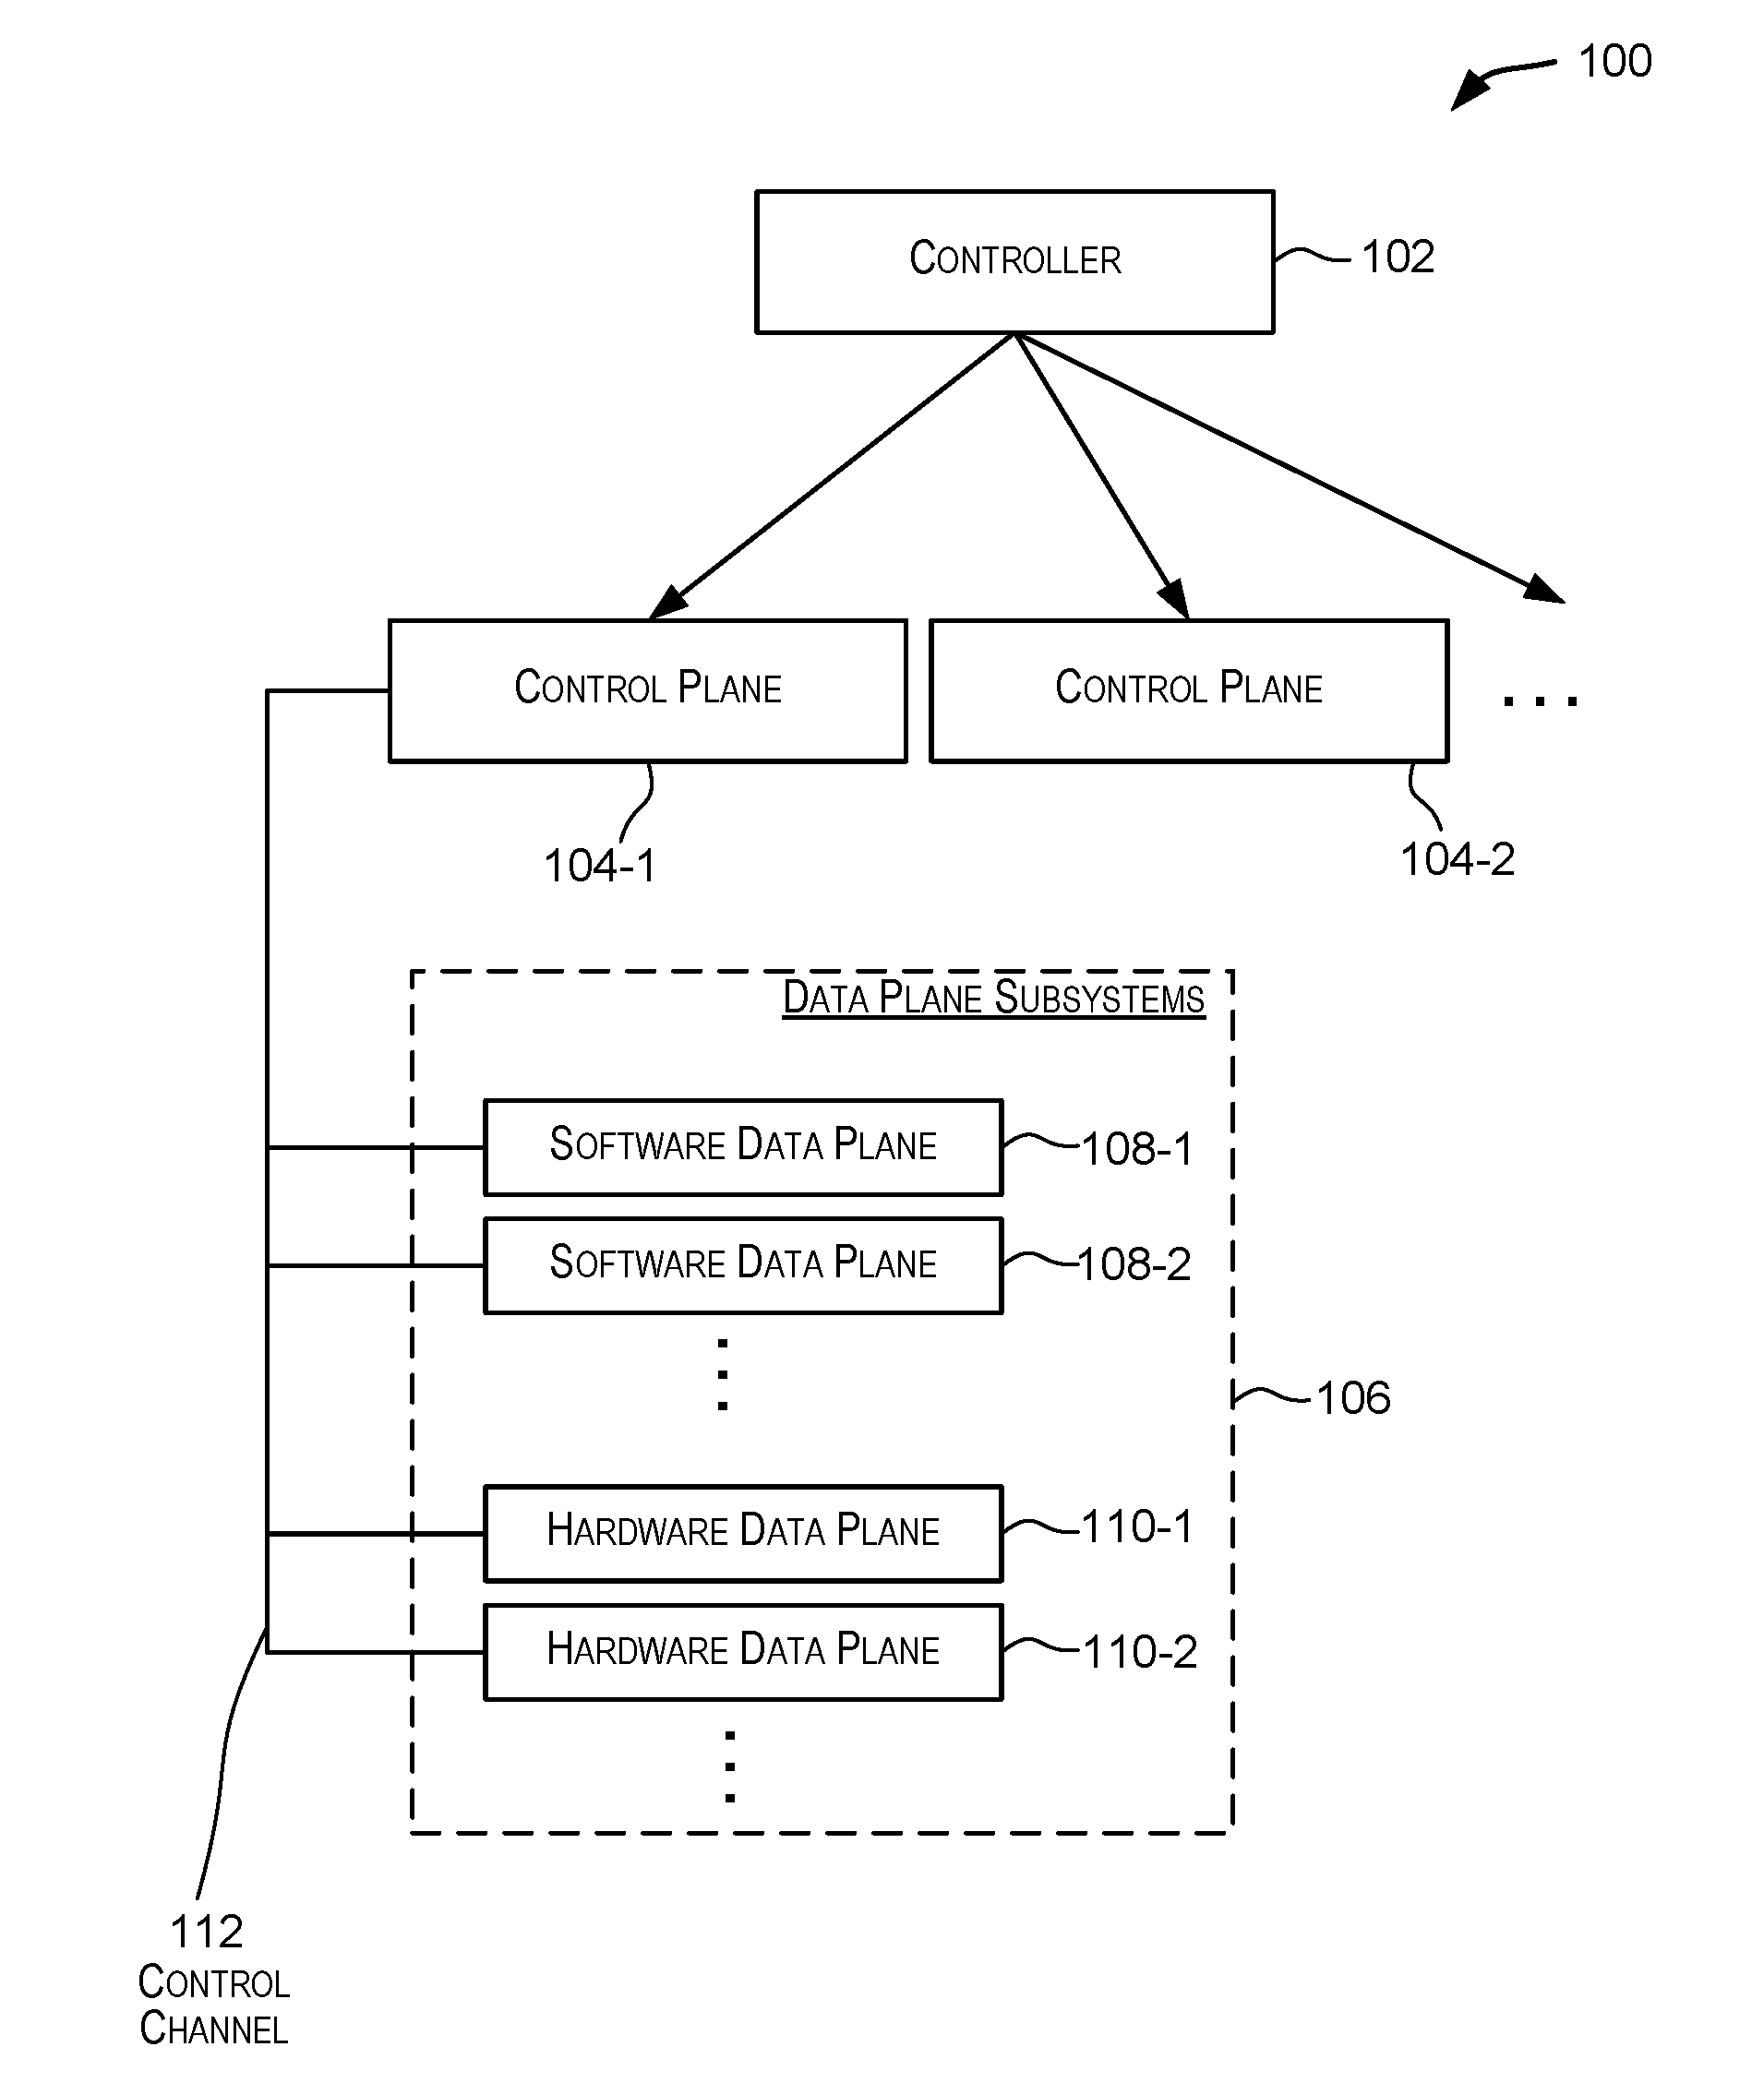 Multilayered distributed router architecture